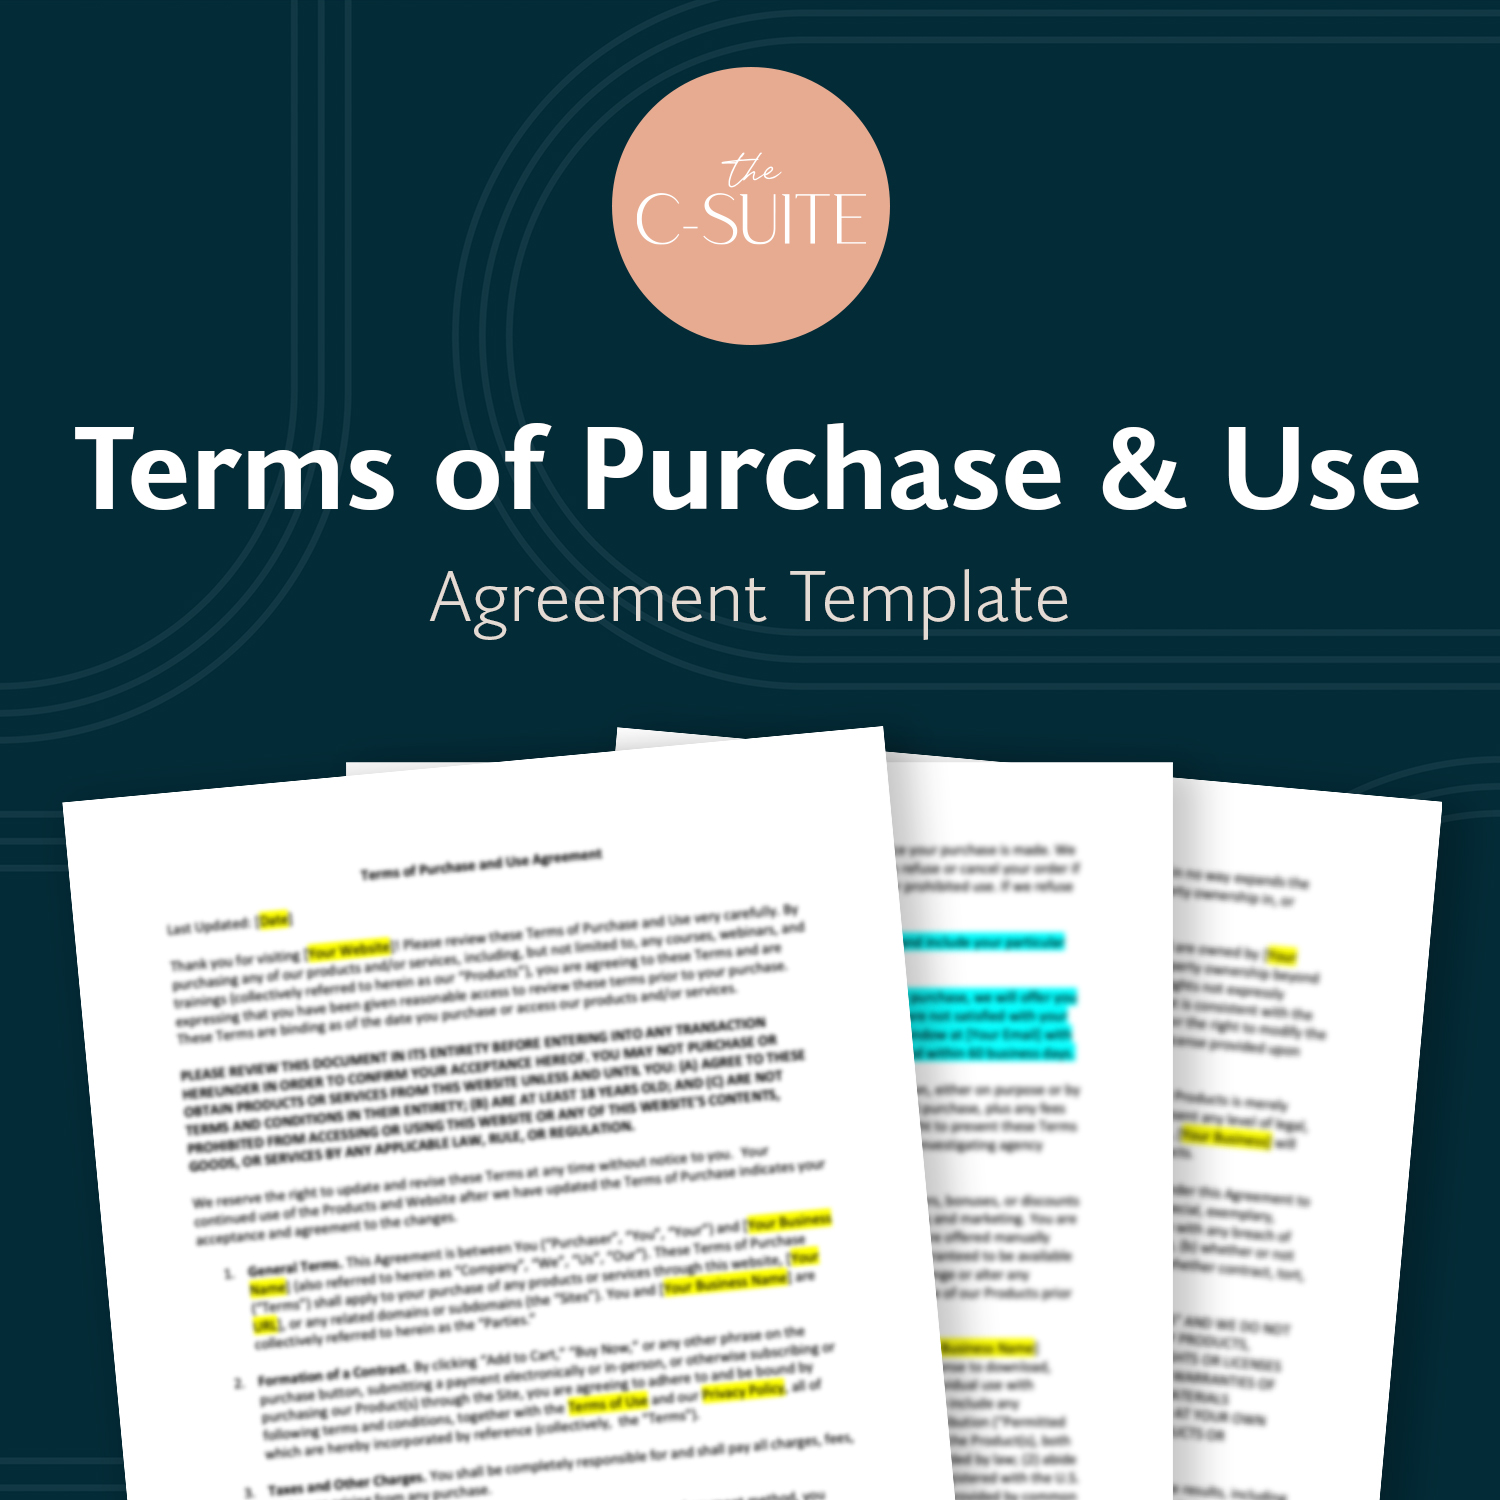 Terms Of Purchase & Use Agreement Template